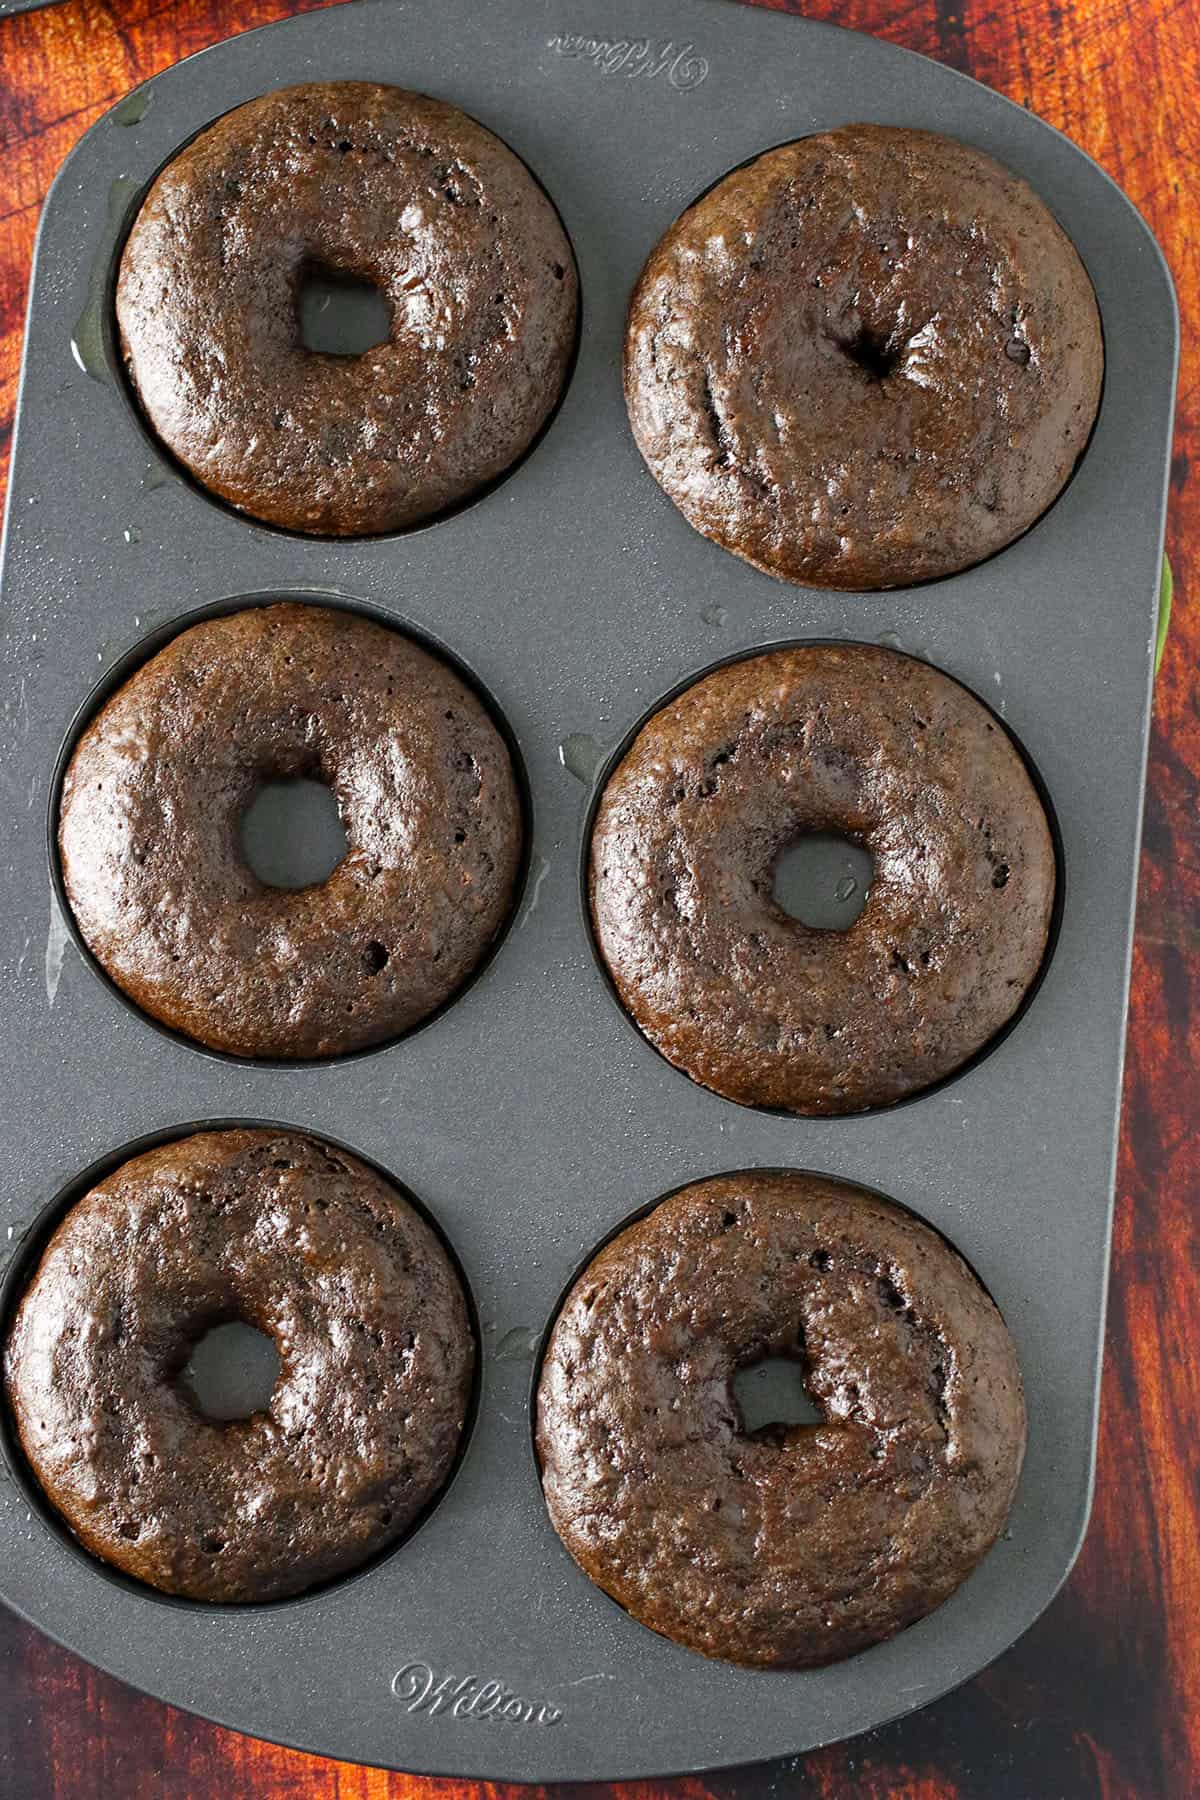 The freshly baked chocolate donuts.